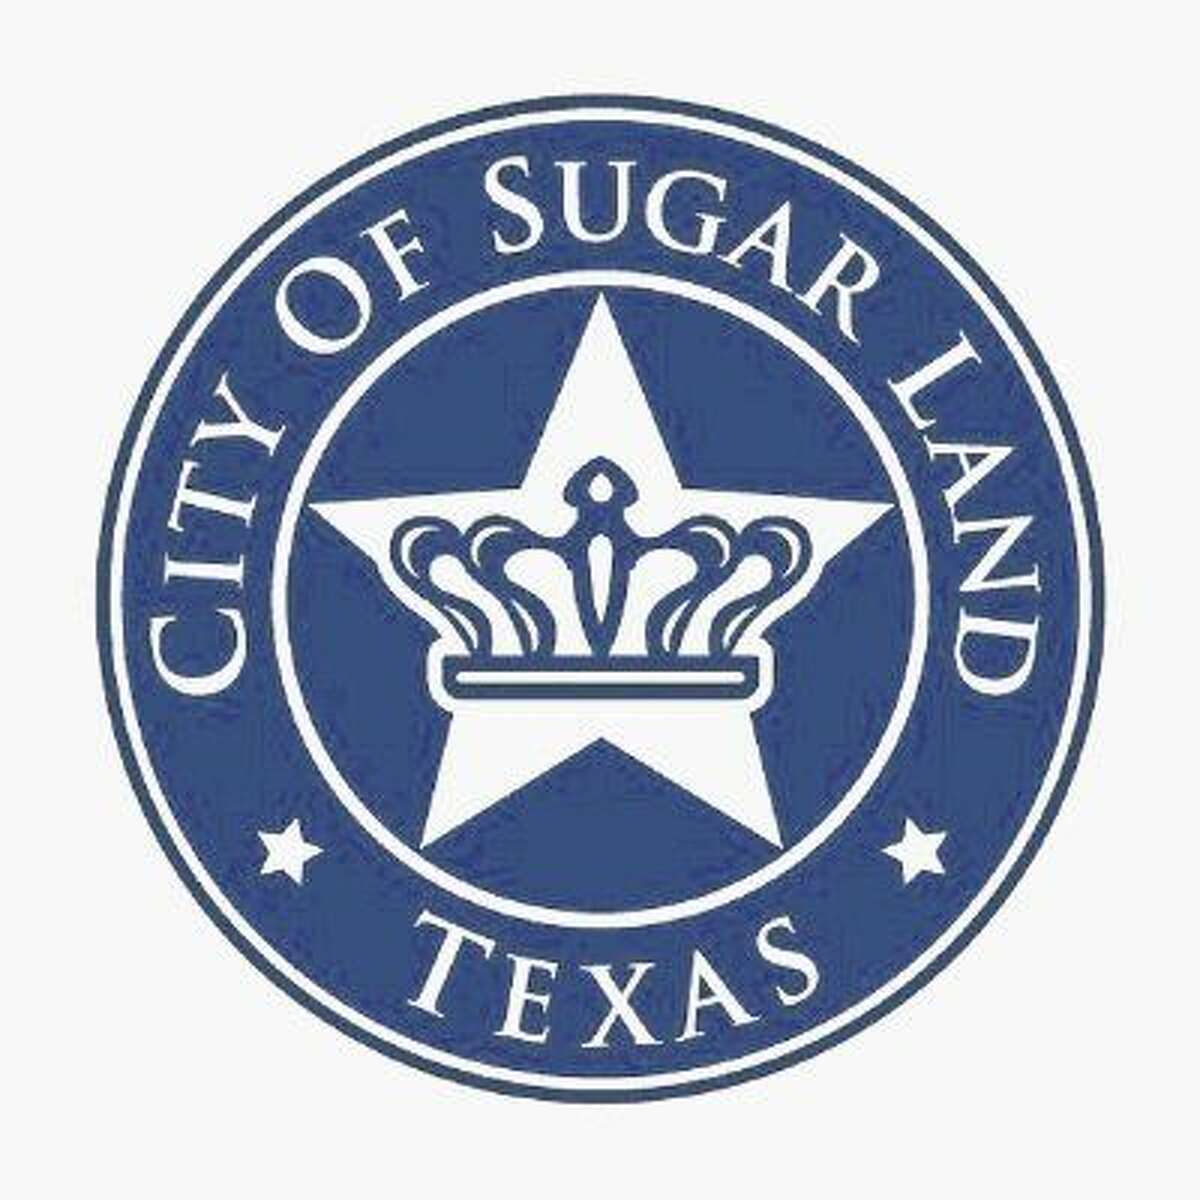 The City of Sugar Land’s (current) logo. City Council voted last week to contract AriaMedia to conduct a year-long marketing and branding study for the city.